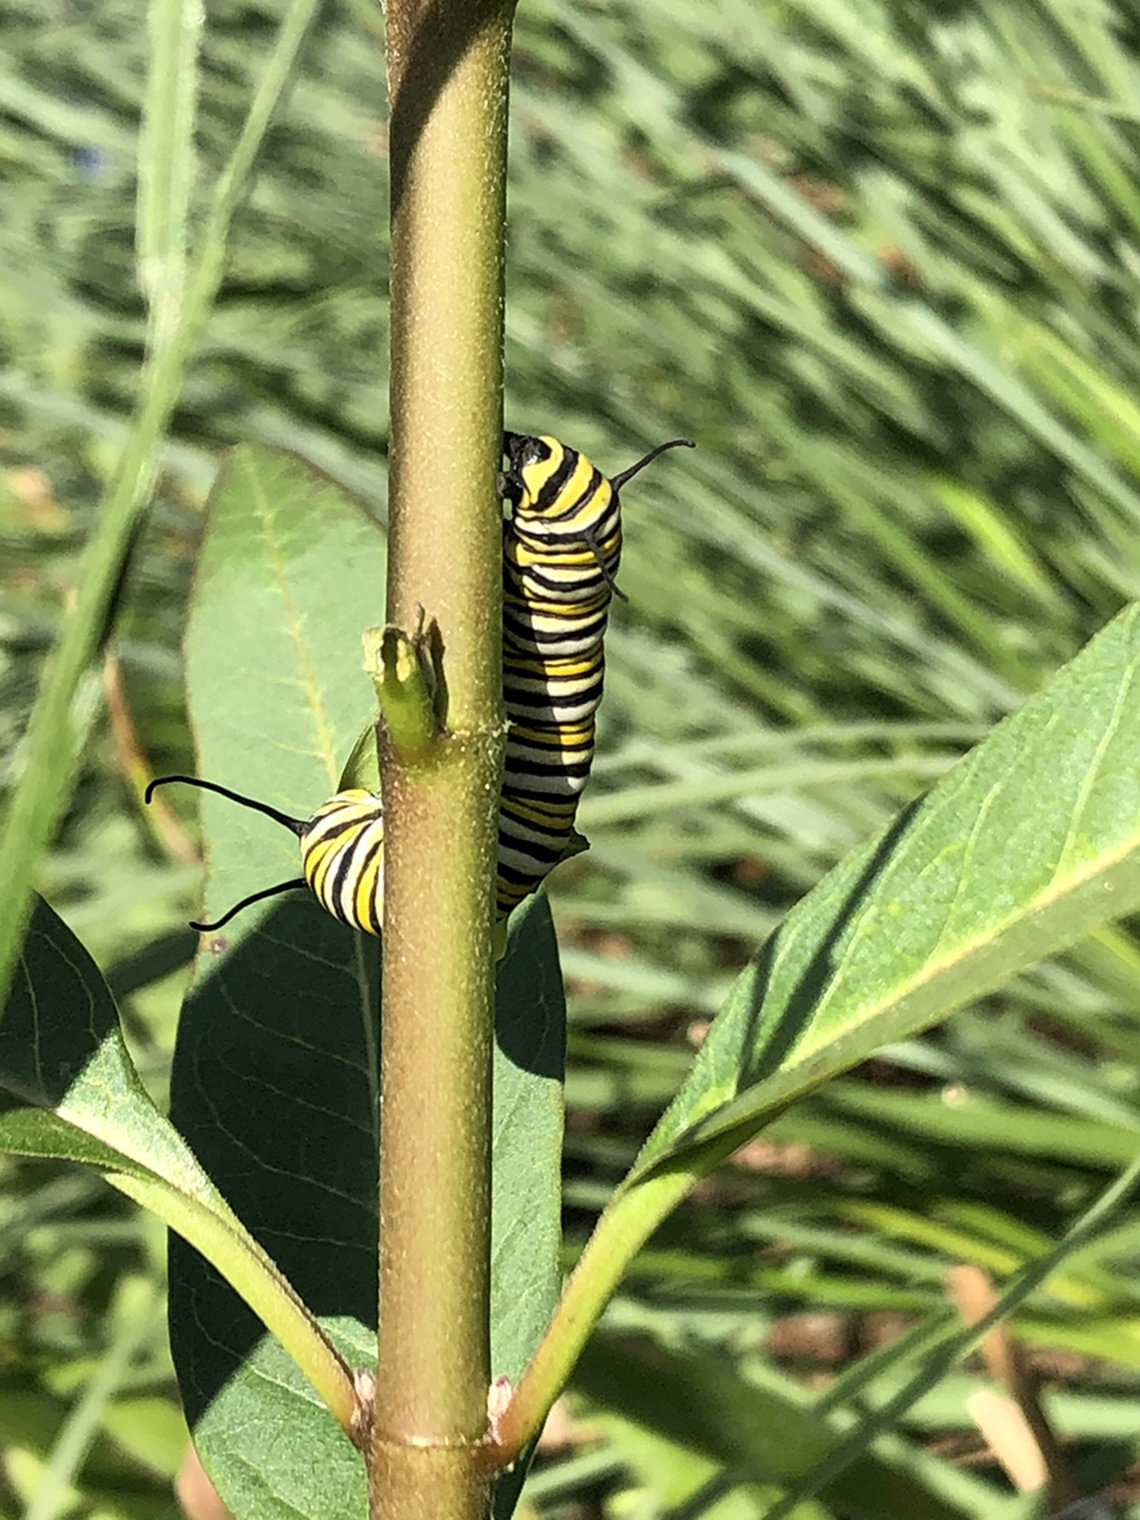 Yellow and black striped caterpillar clinging to a plant stalk